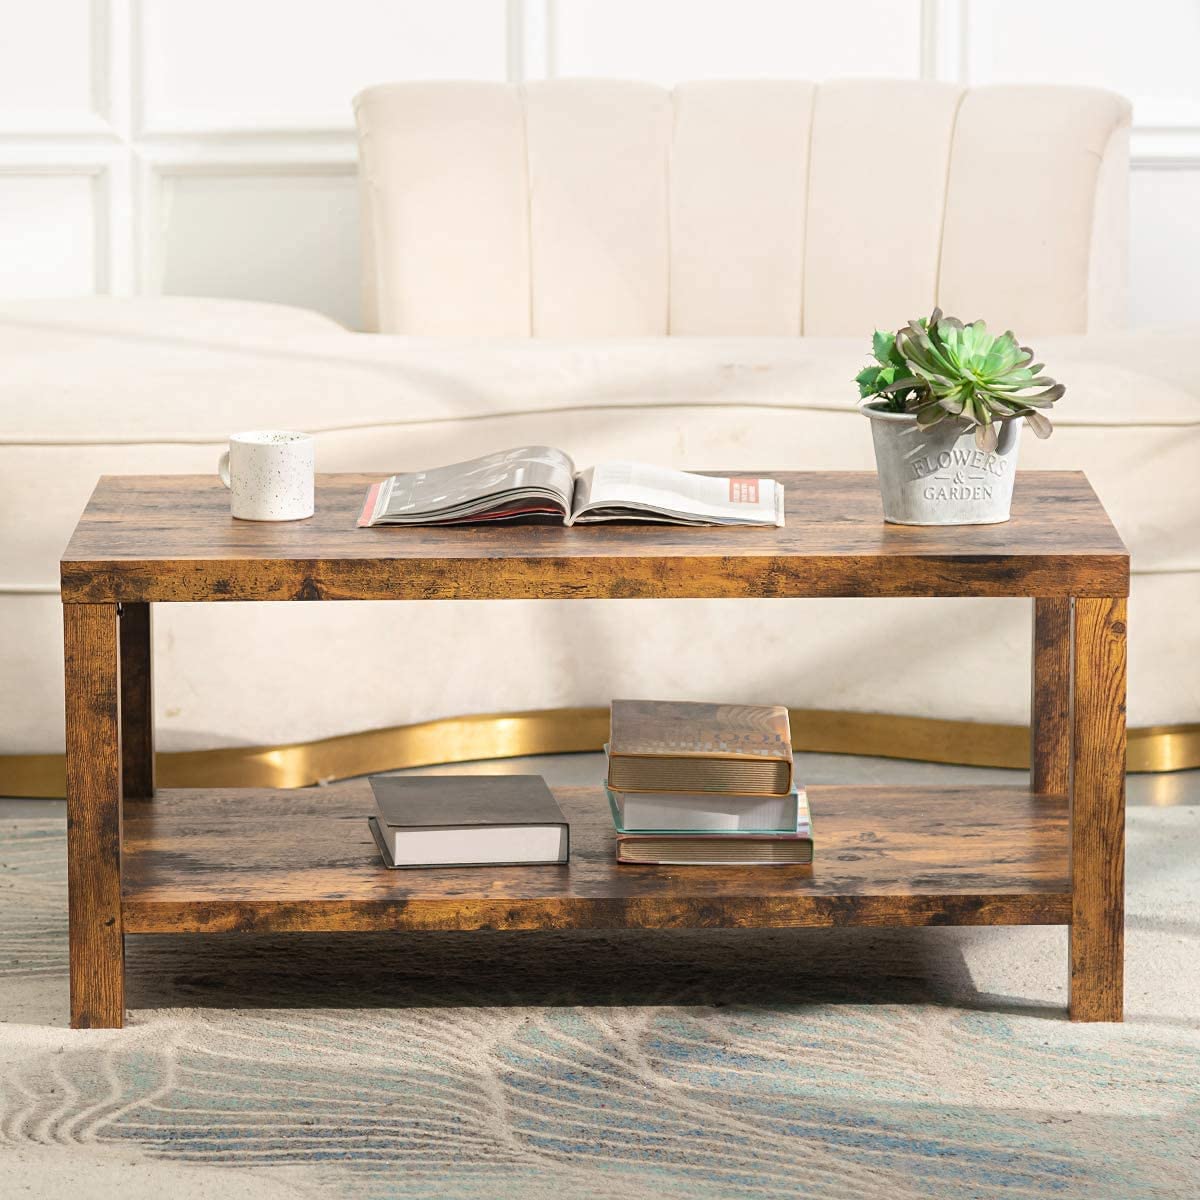 Rustic Farmhouse Coffee Table, Living Room Table with Storage Shelf, Two-Tier Coffee Table for Living Room